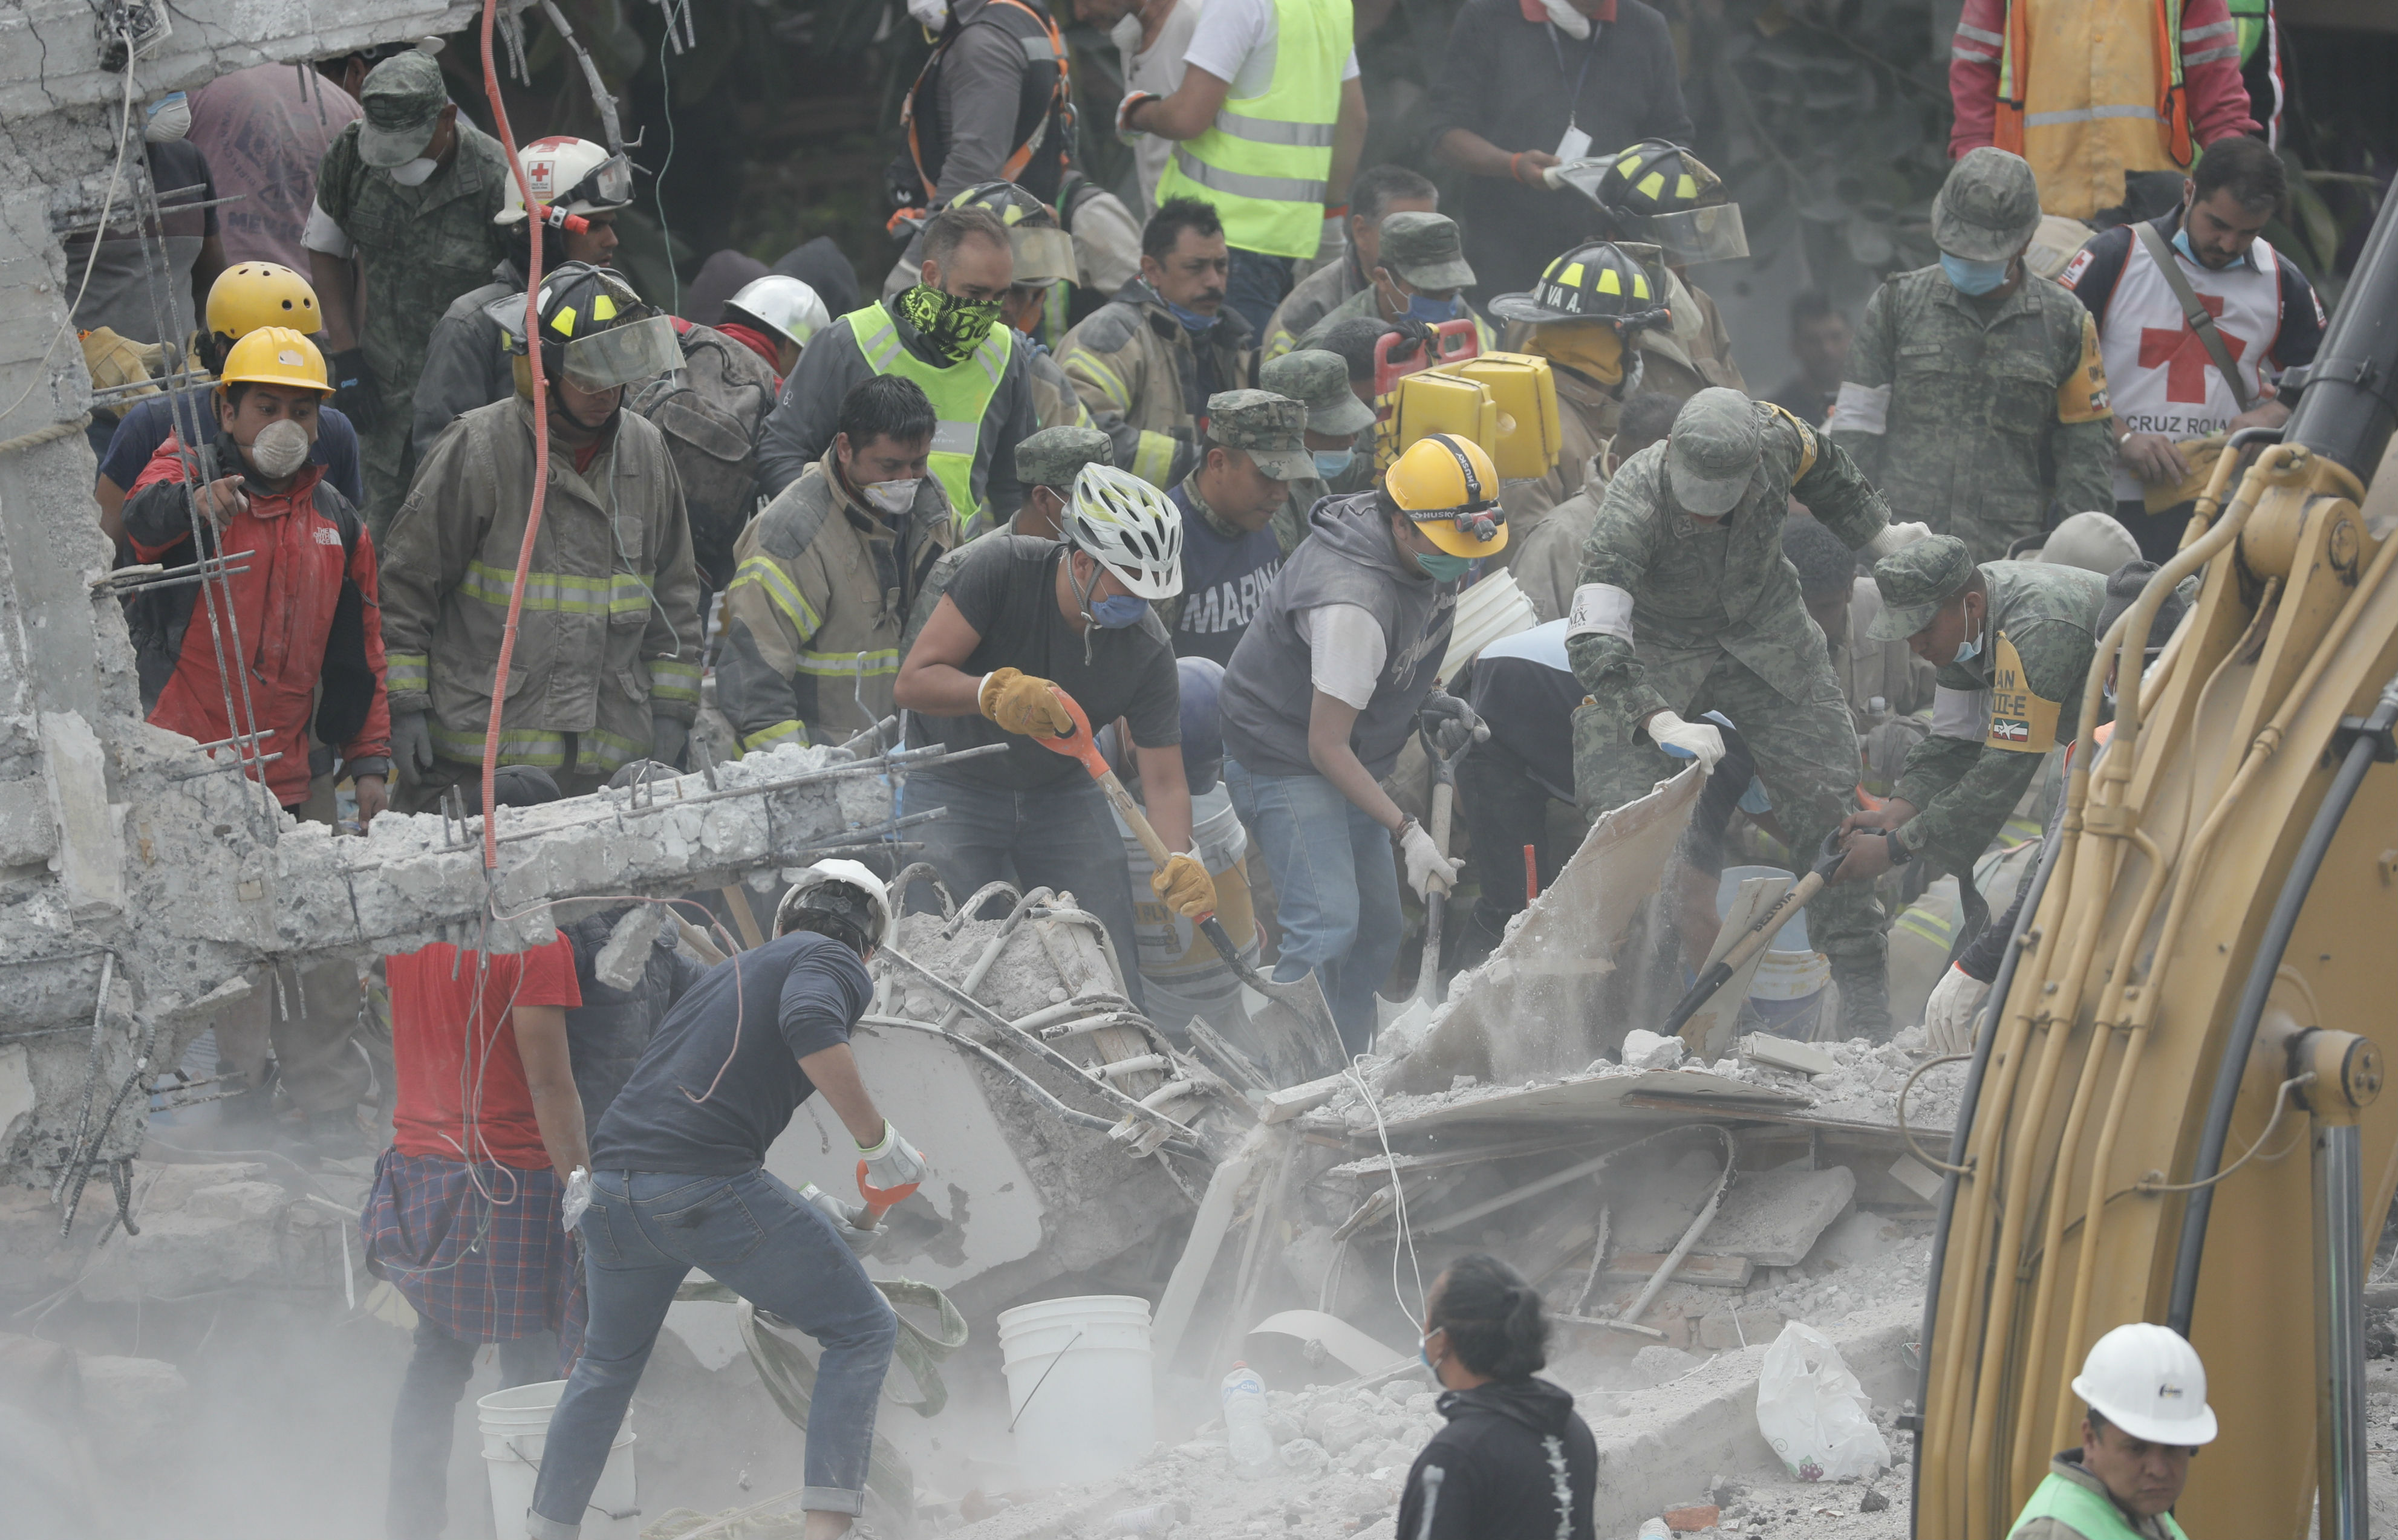 Situation in Mexico 'extremely serious' following earthquake, says Bishop 